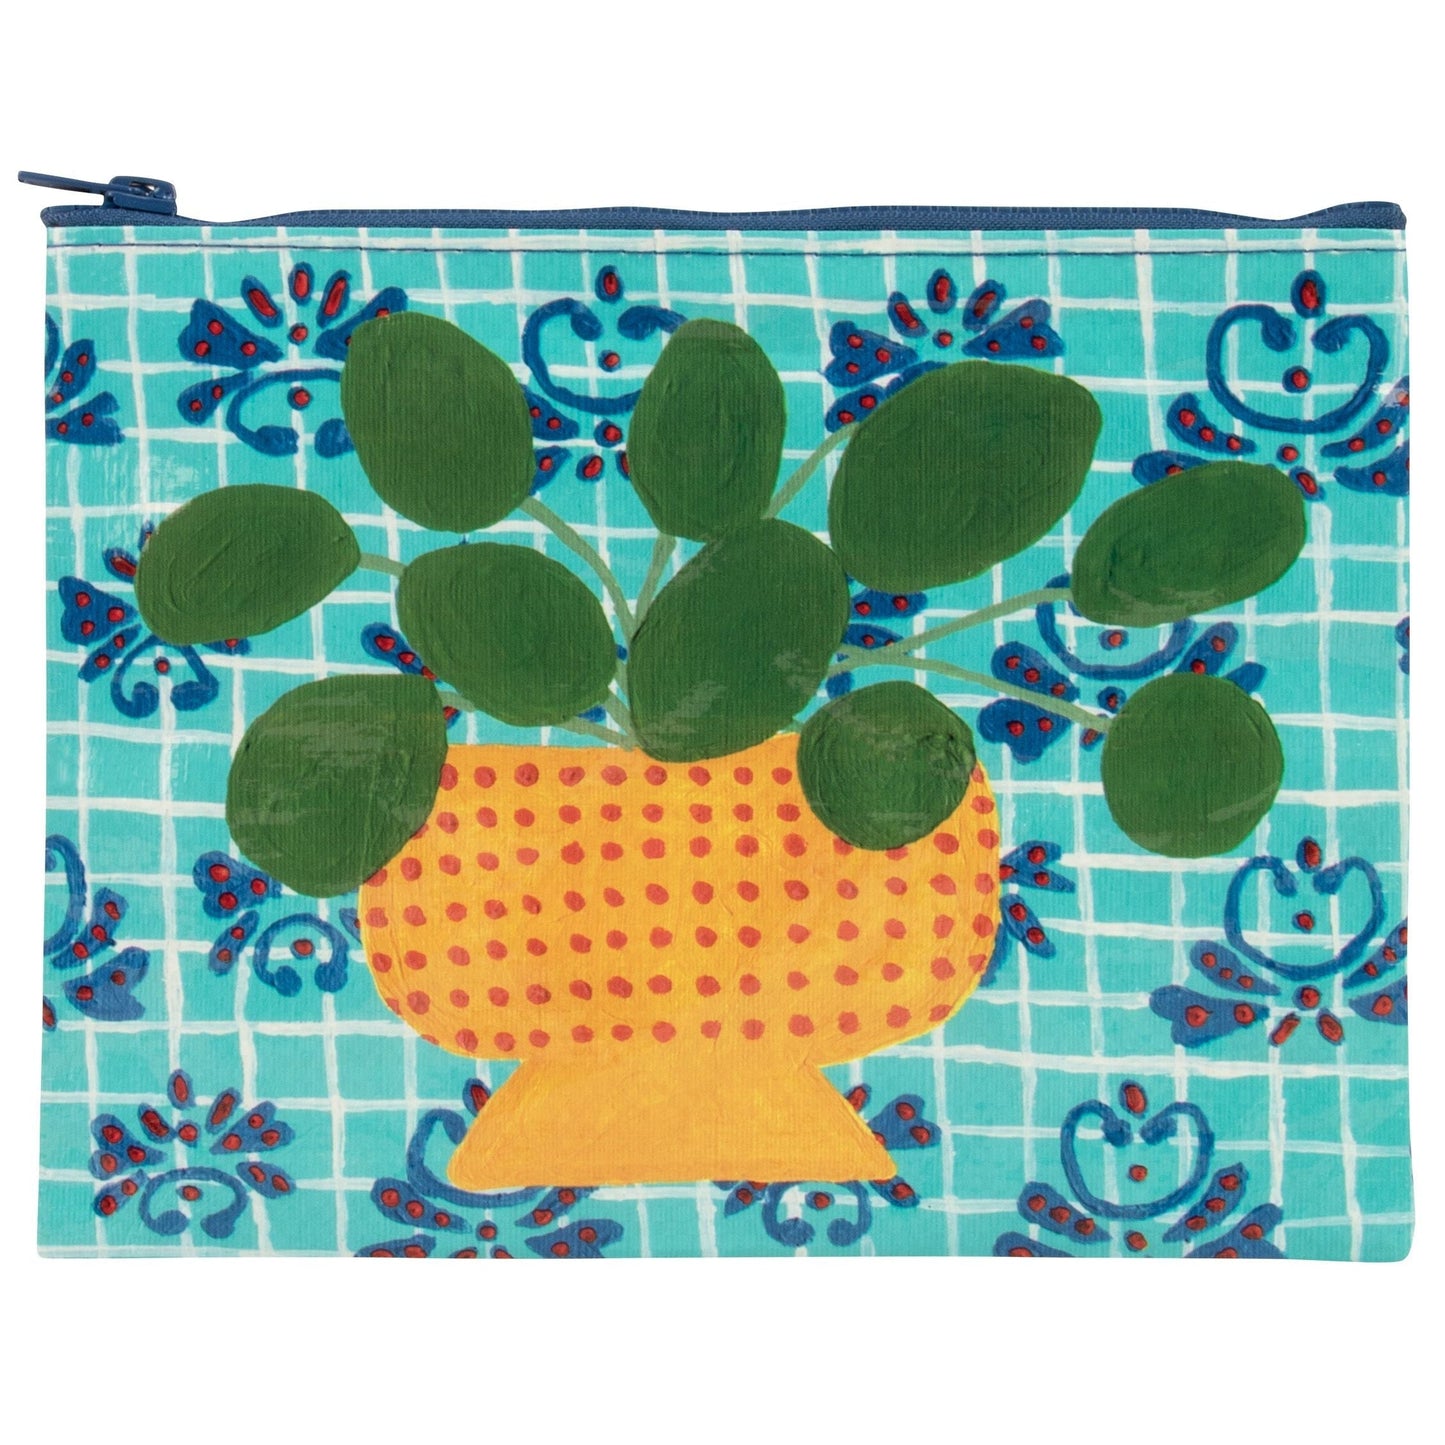 Pretty Plant Recycled Material Zipper Pouch